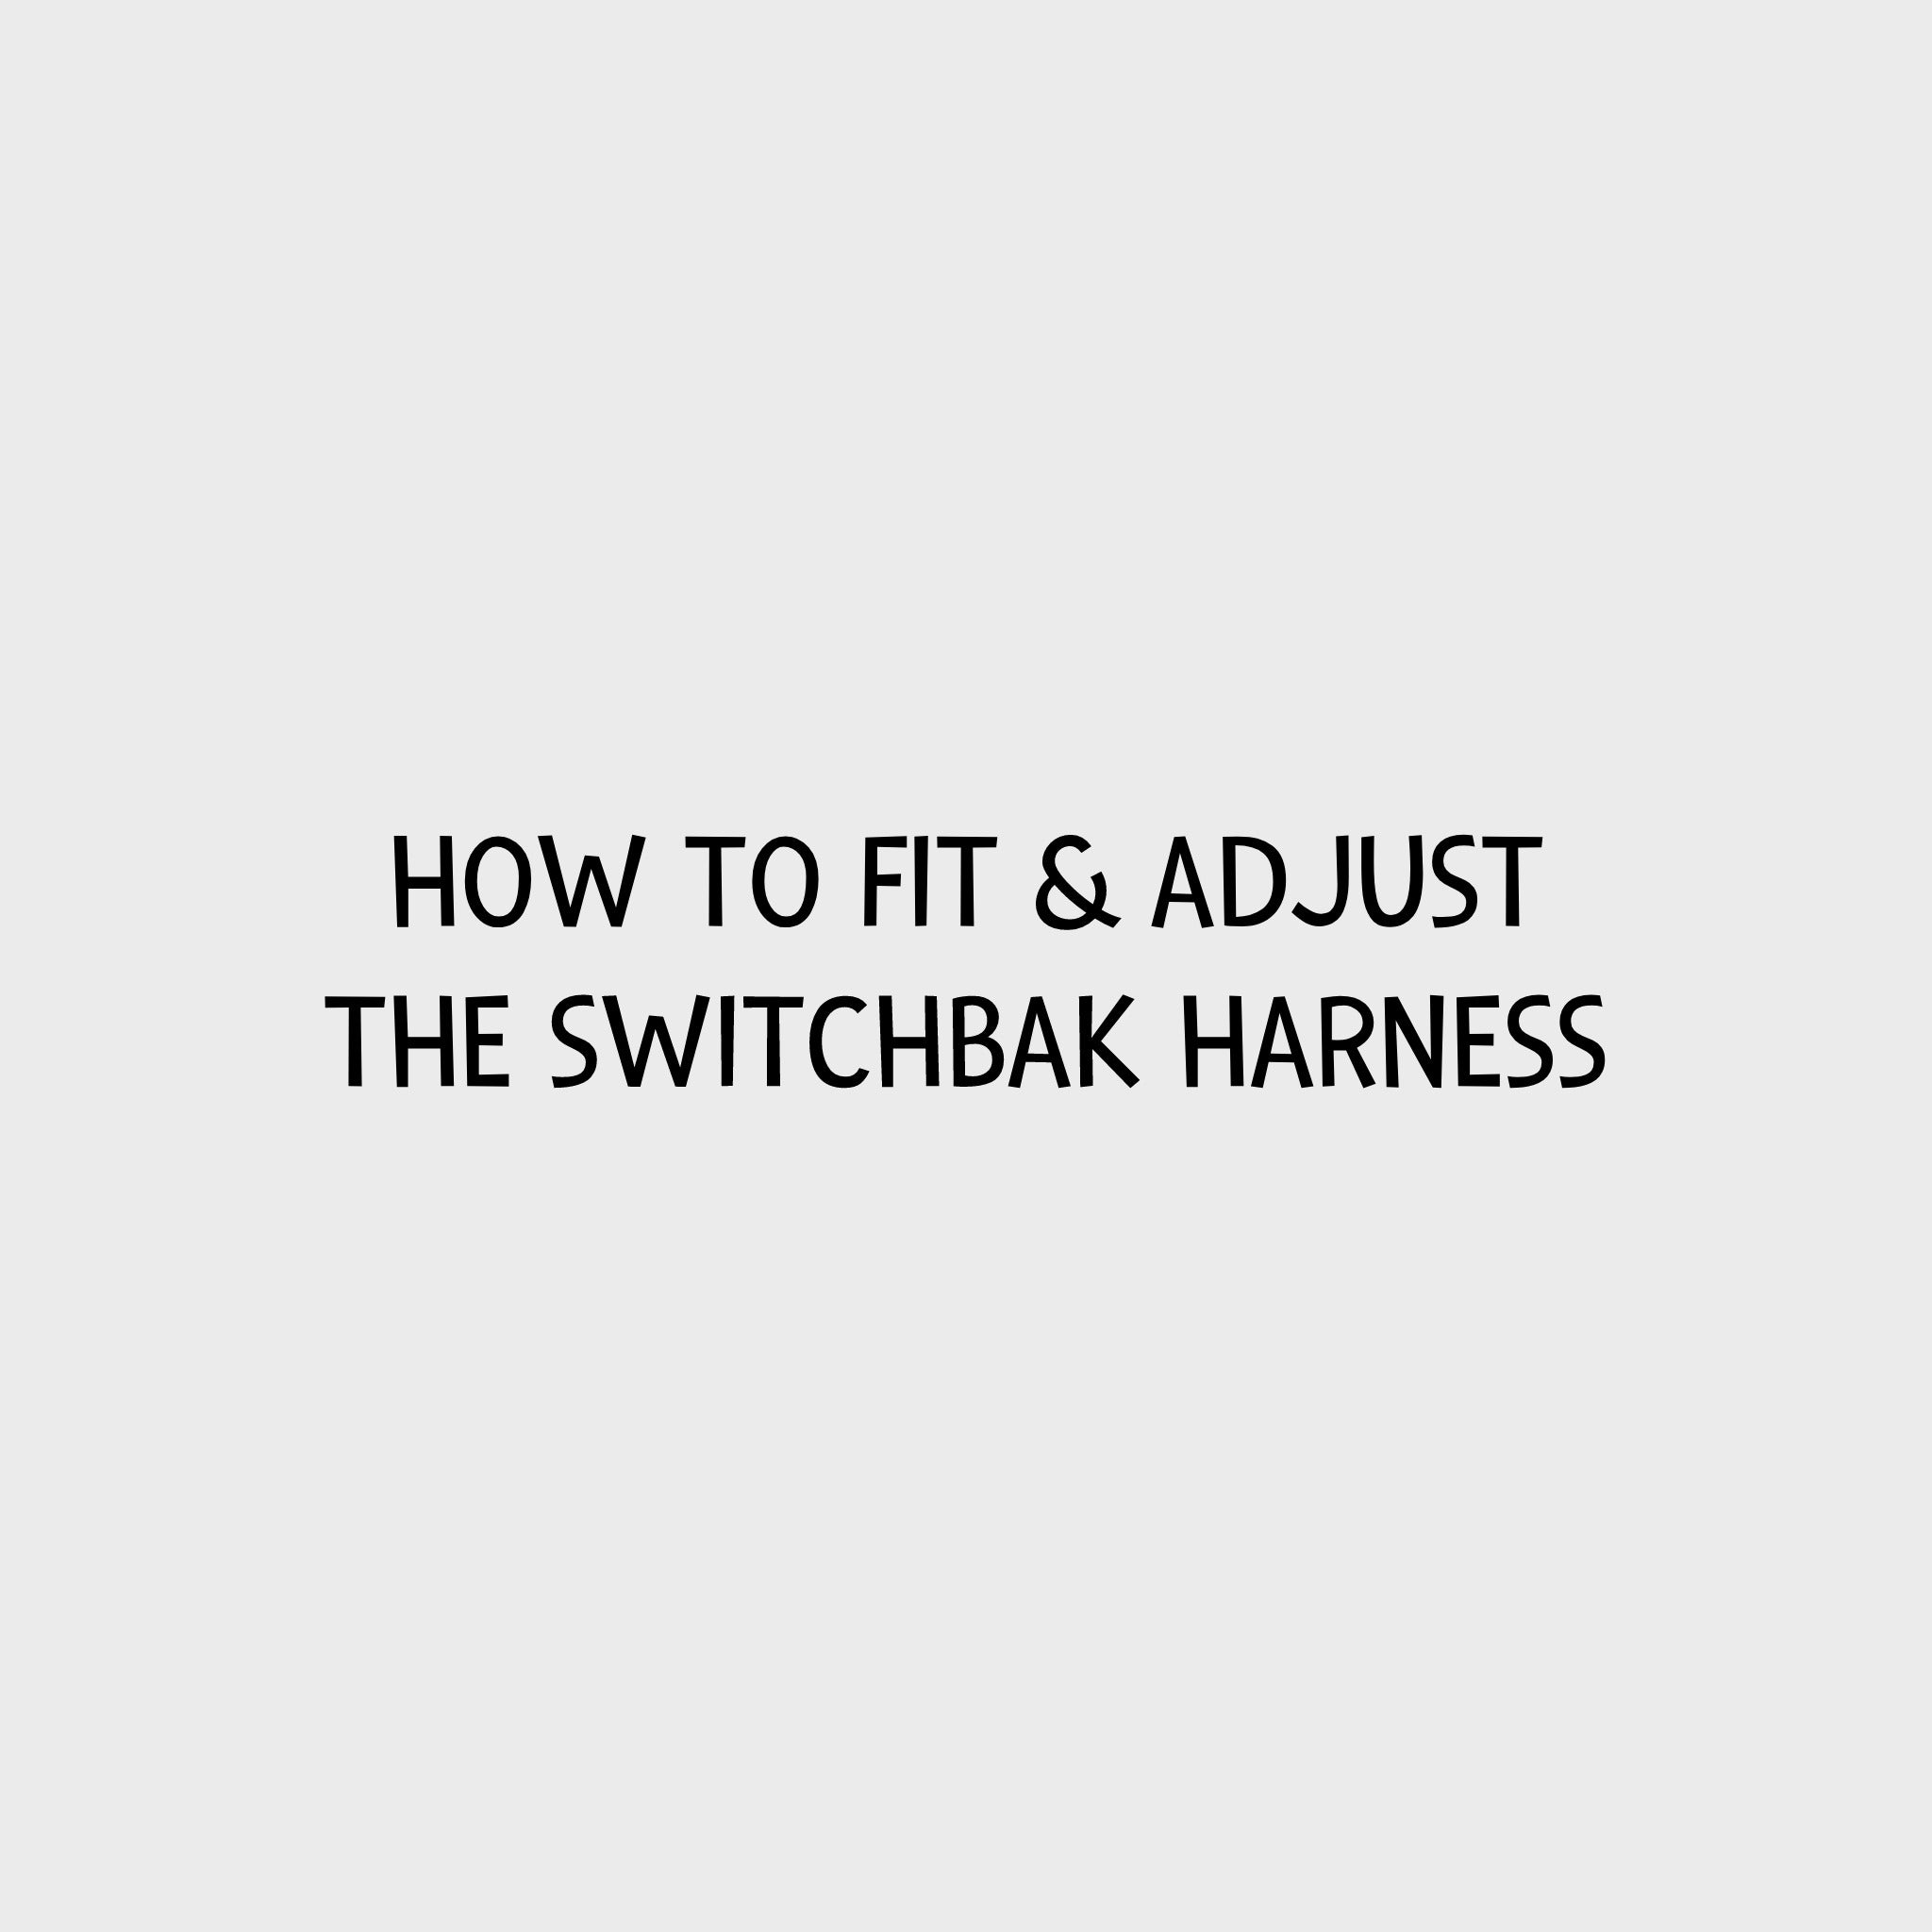 Video - How to fit & adjust the Ruffwear Switchbak Harness